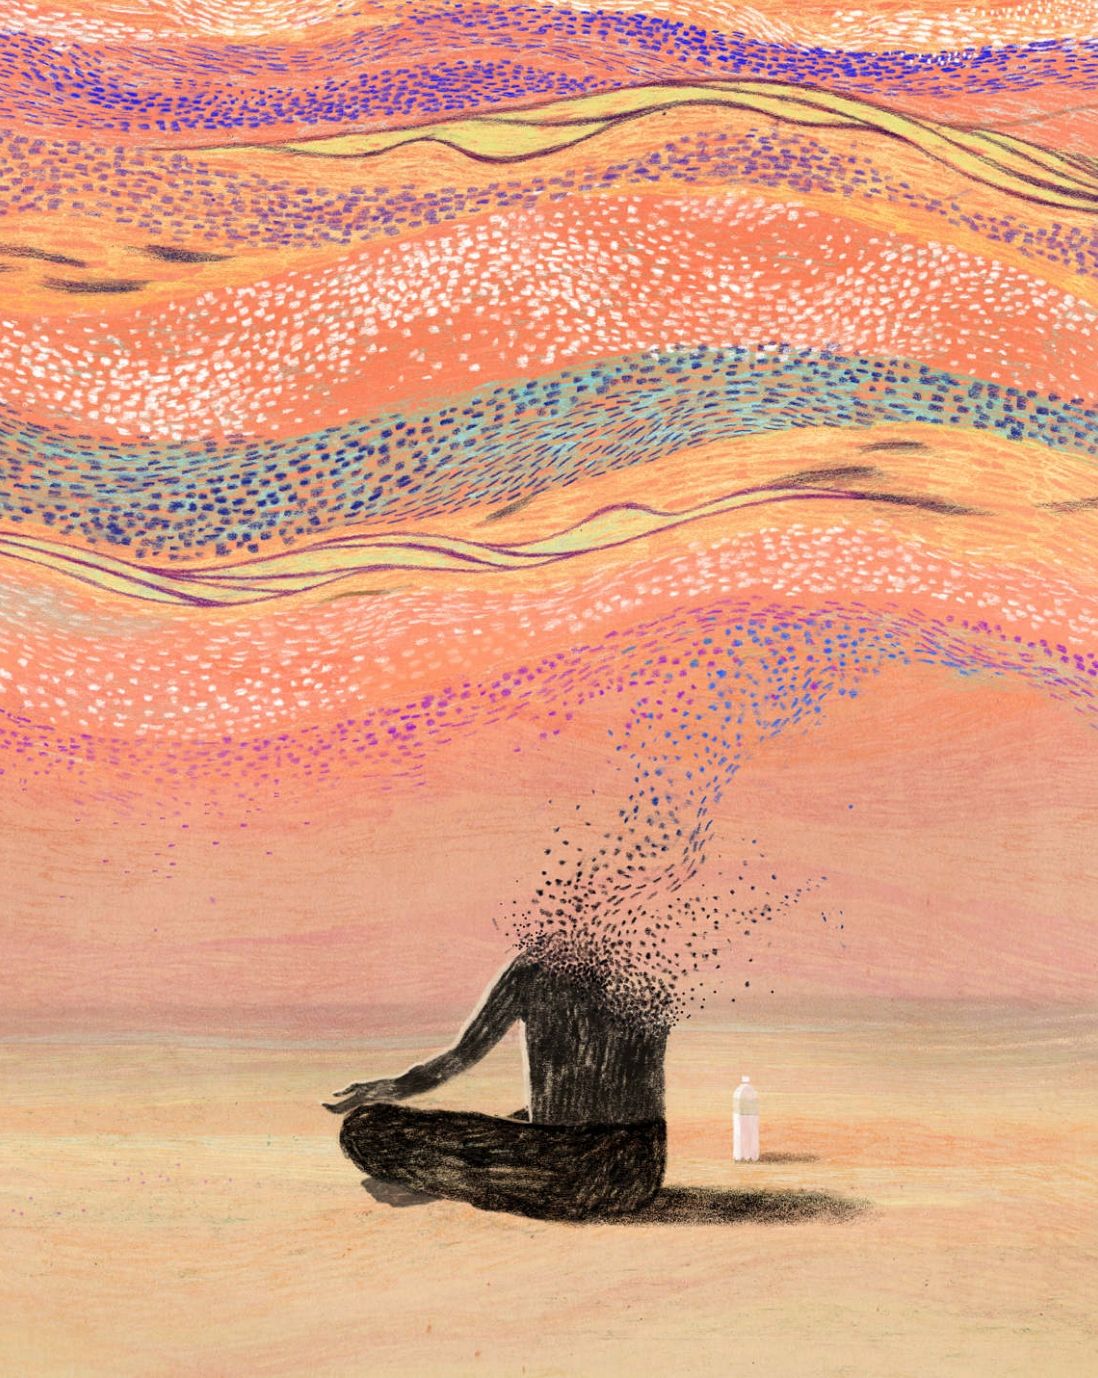 fantastical illustration of a person's silhouette sitting crossed legged, as their body "vaporizes" into colorful particles that dot the sky above, creating a wave of patterns